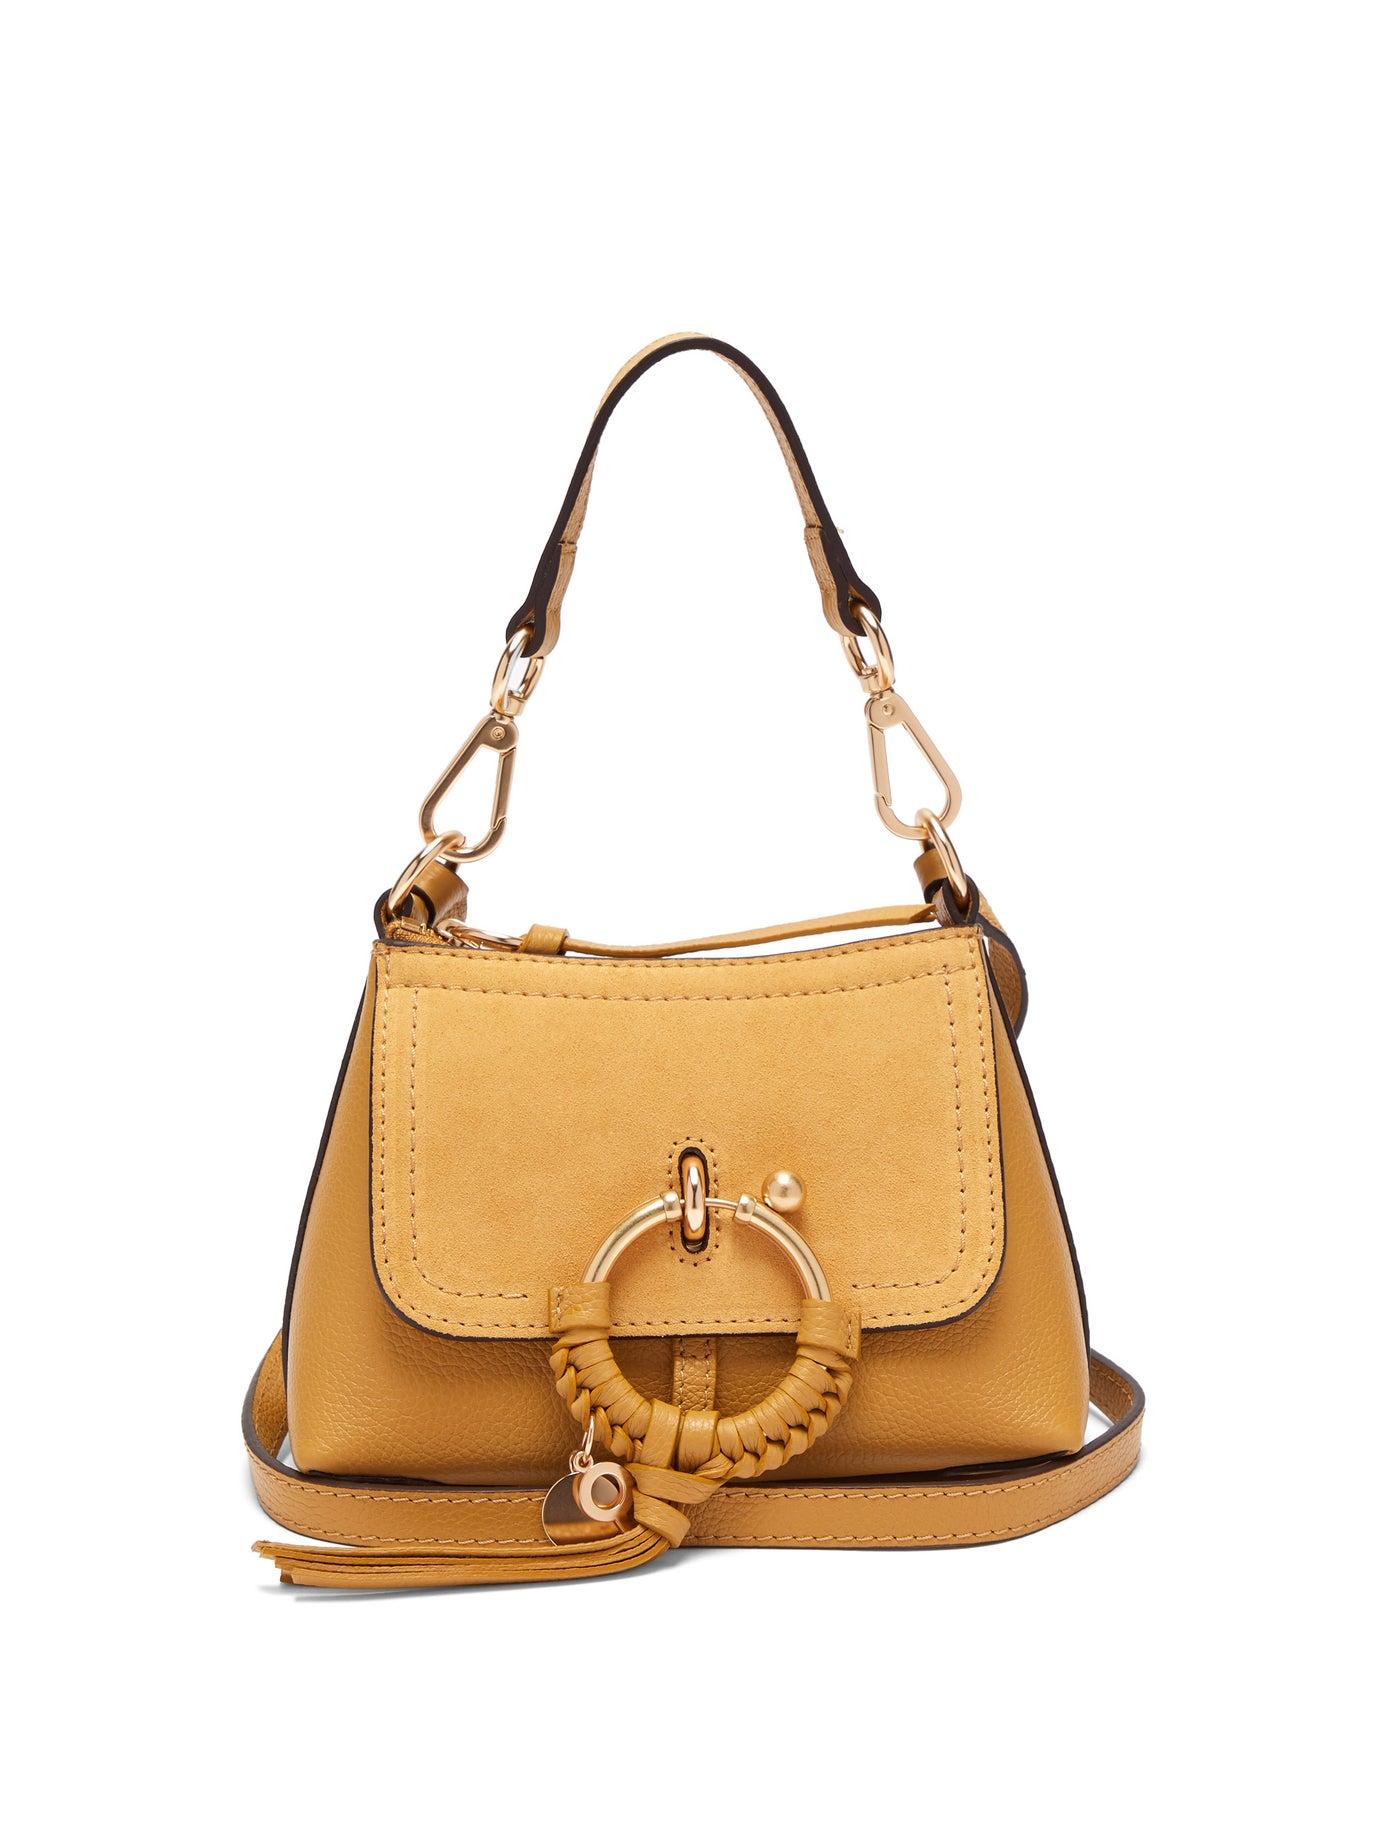 See By Chloé Joan Mini Leather Cross Body Bag in Yellow - Lyst